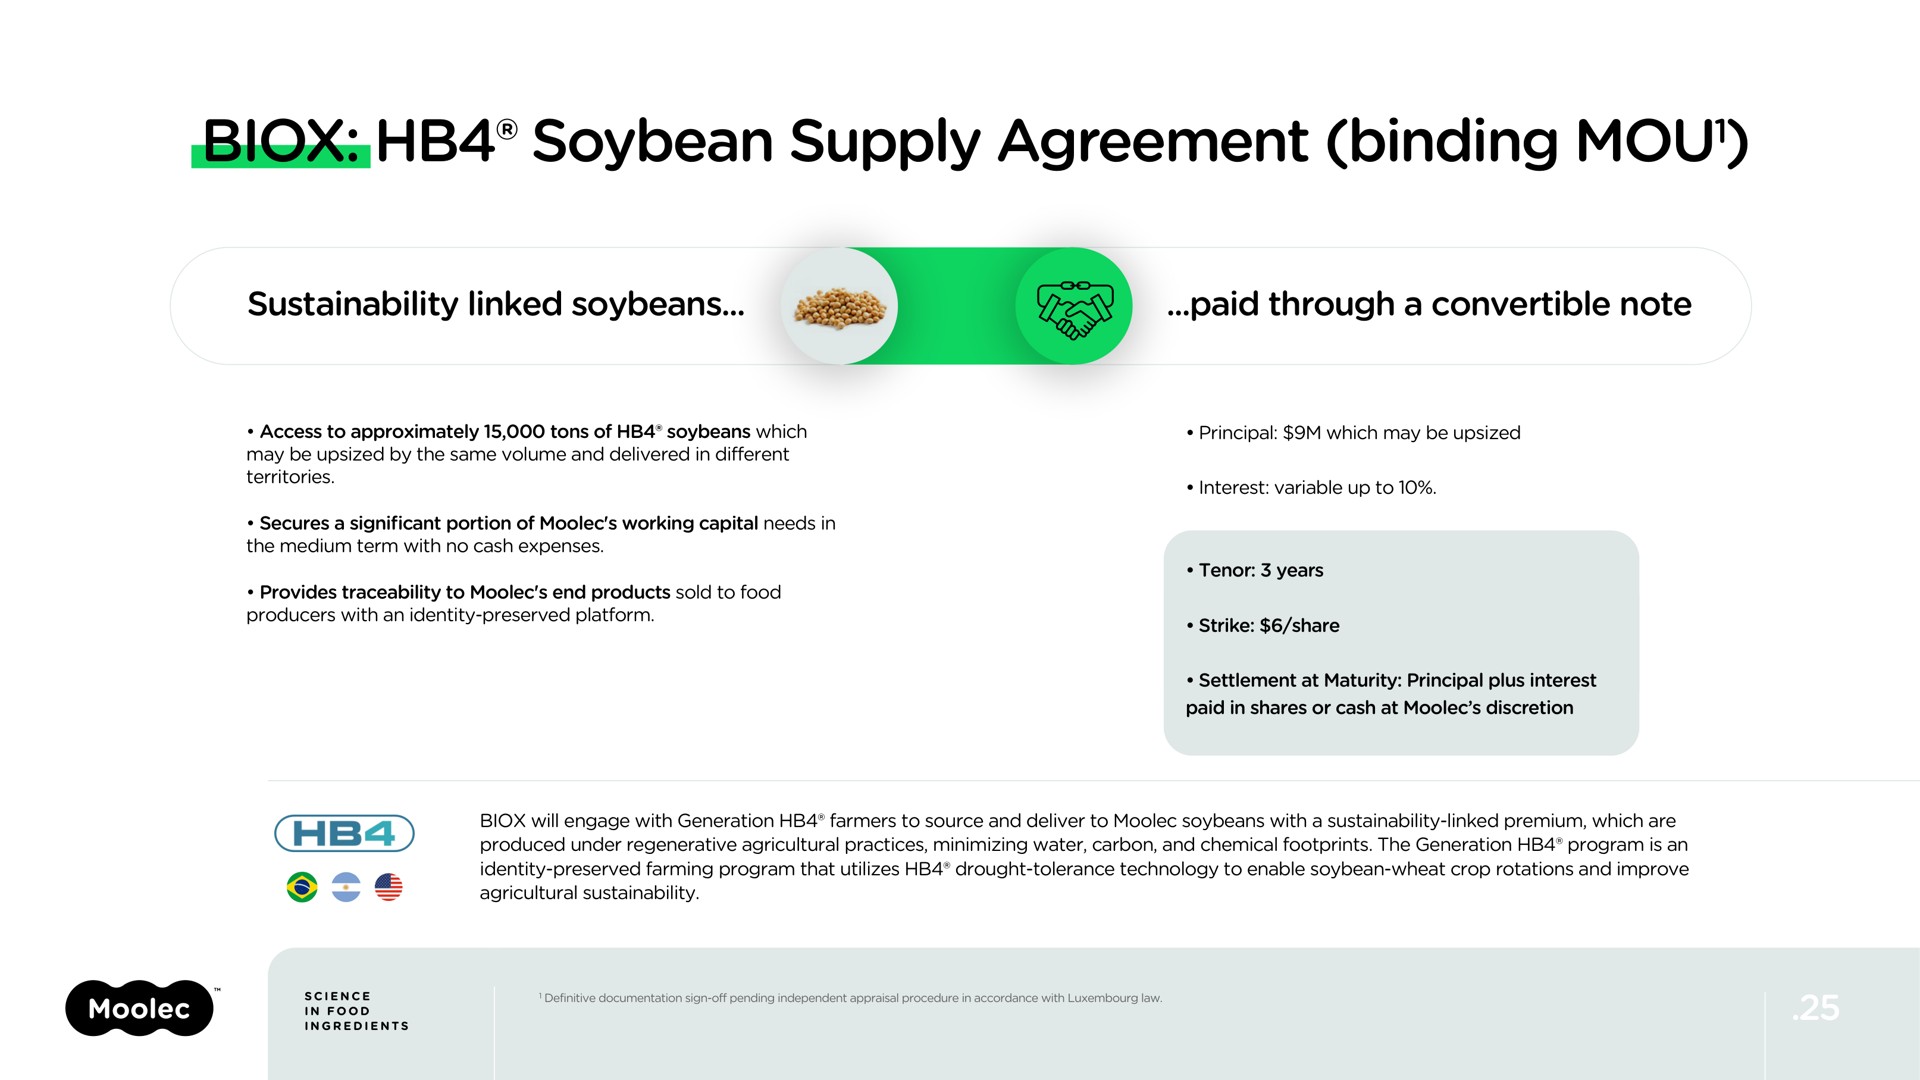 soybean supply agreement binding mou mou | Moolec Science